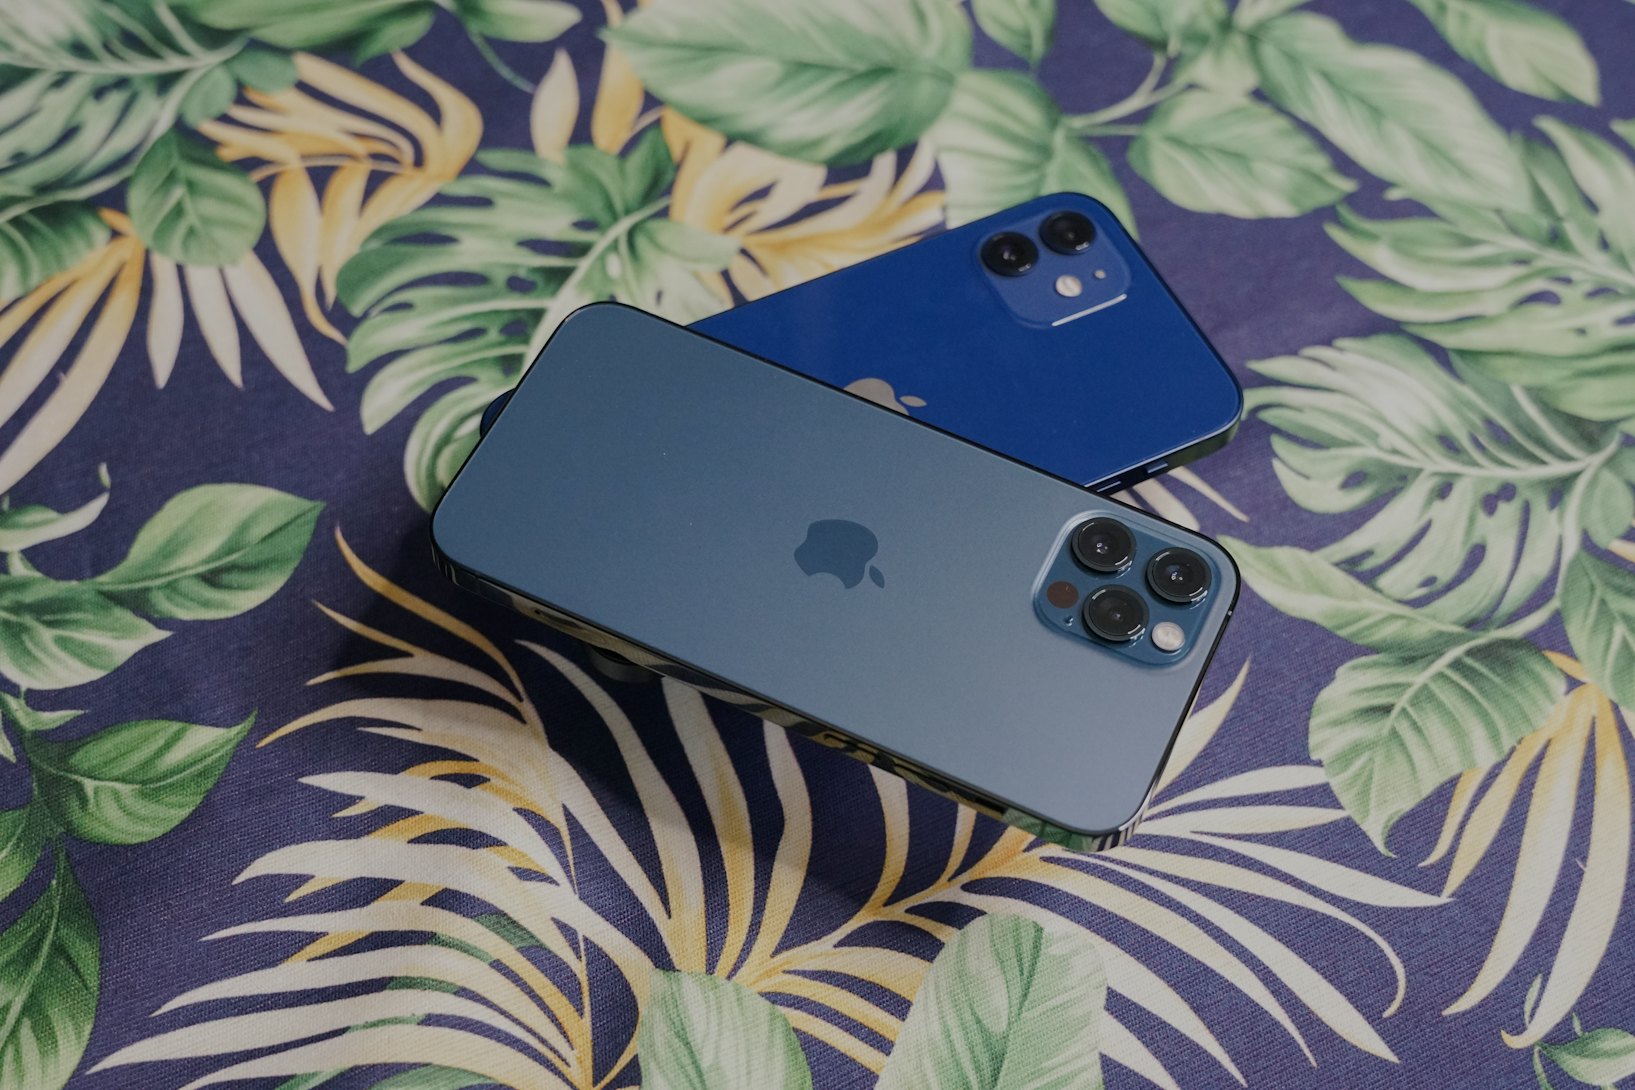 Apple iPhone XR Definitive Review: The Best iPhone Yet?